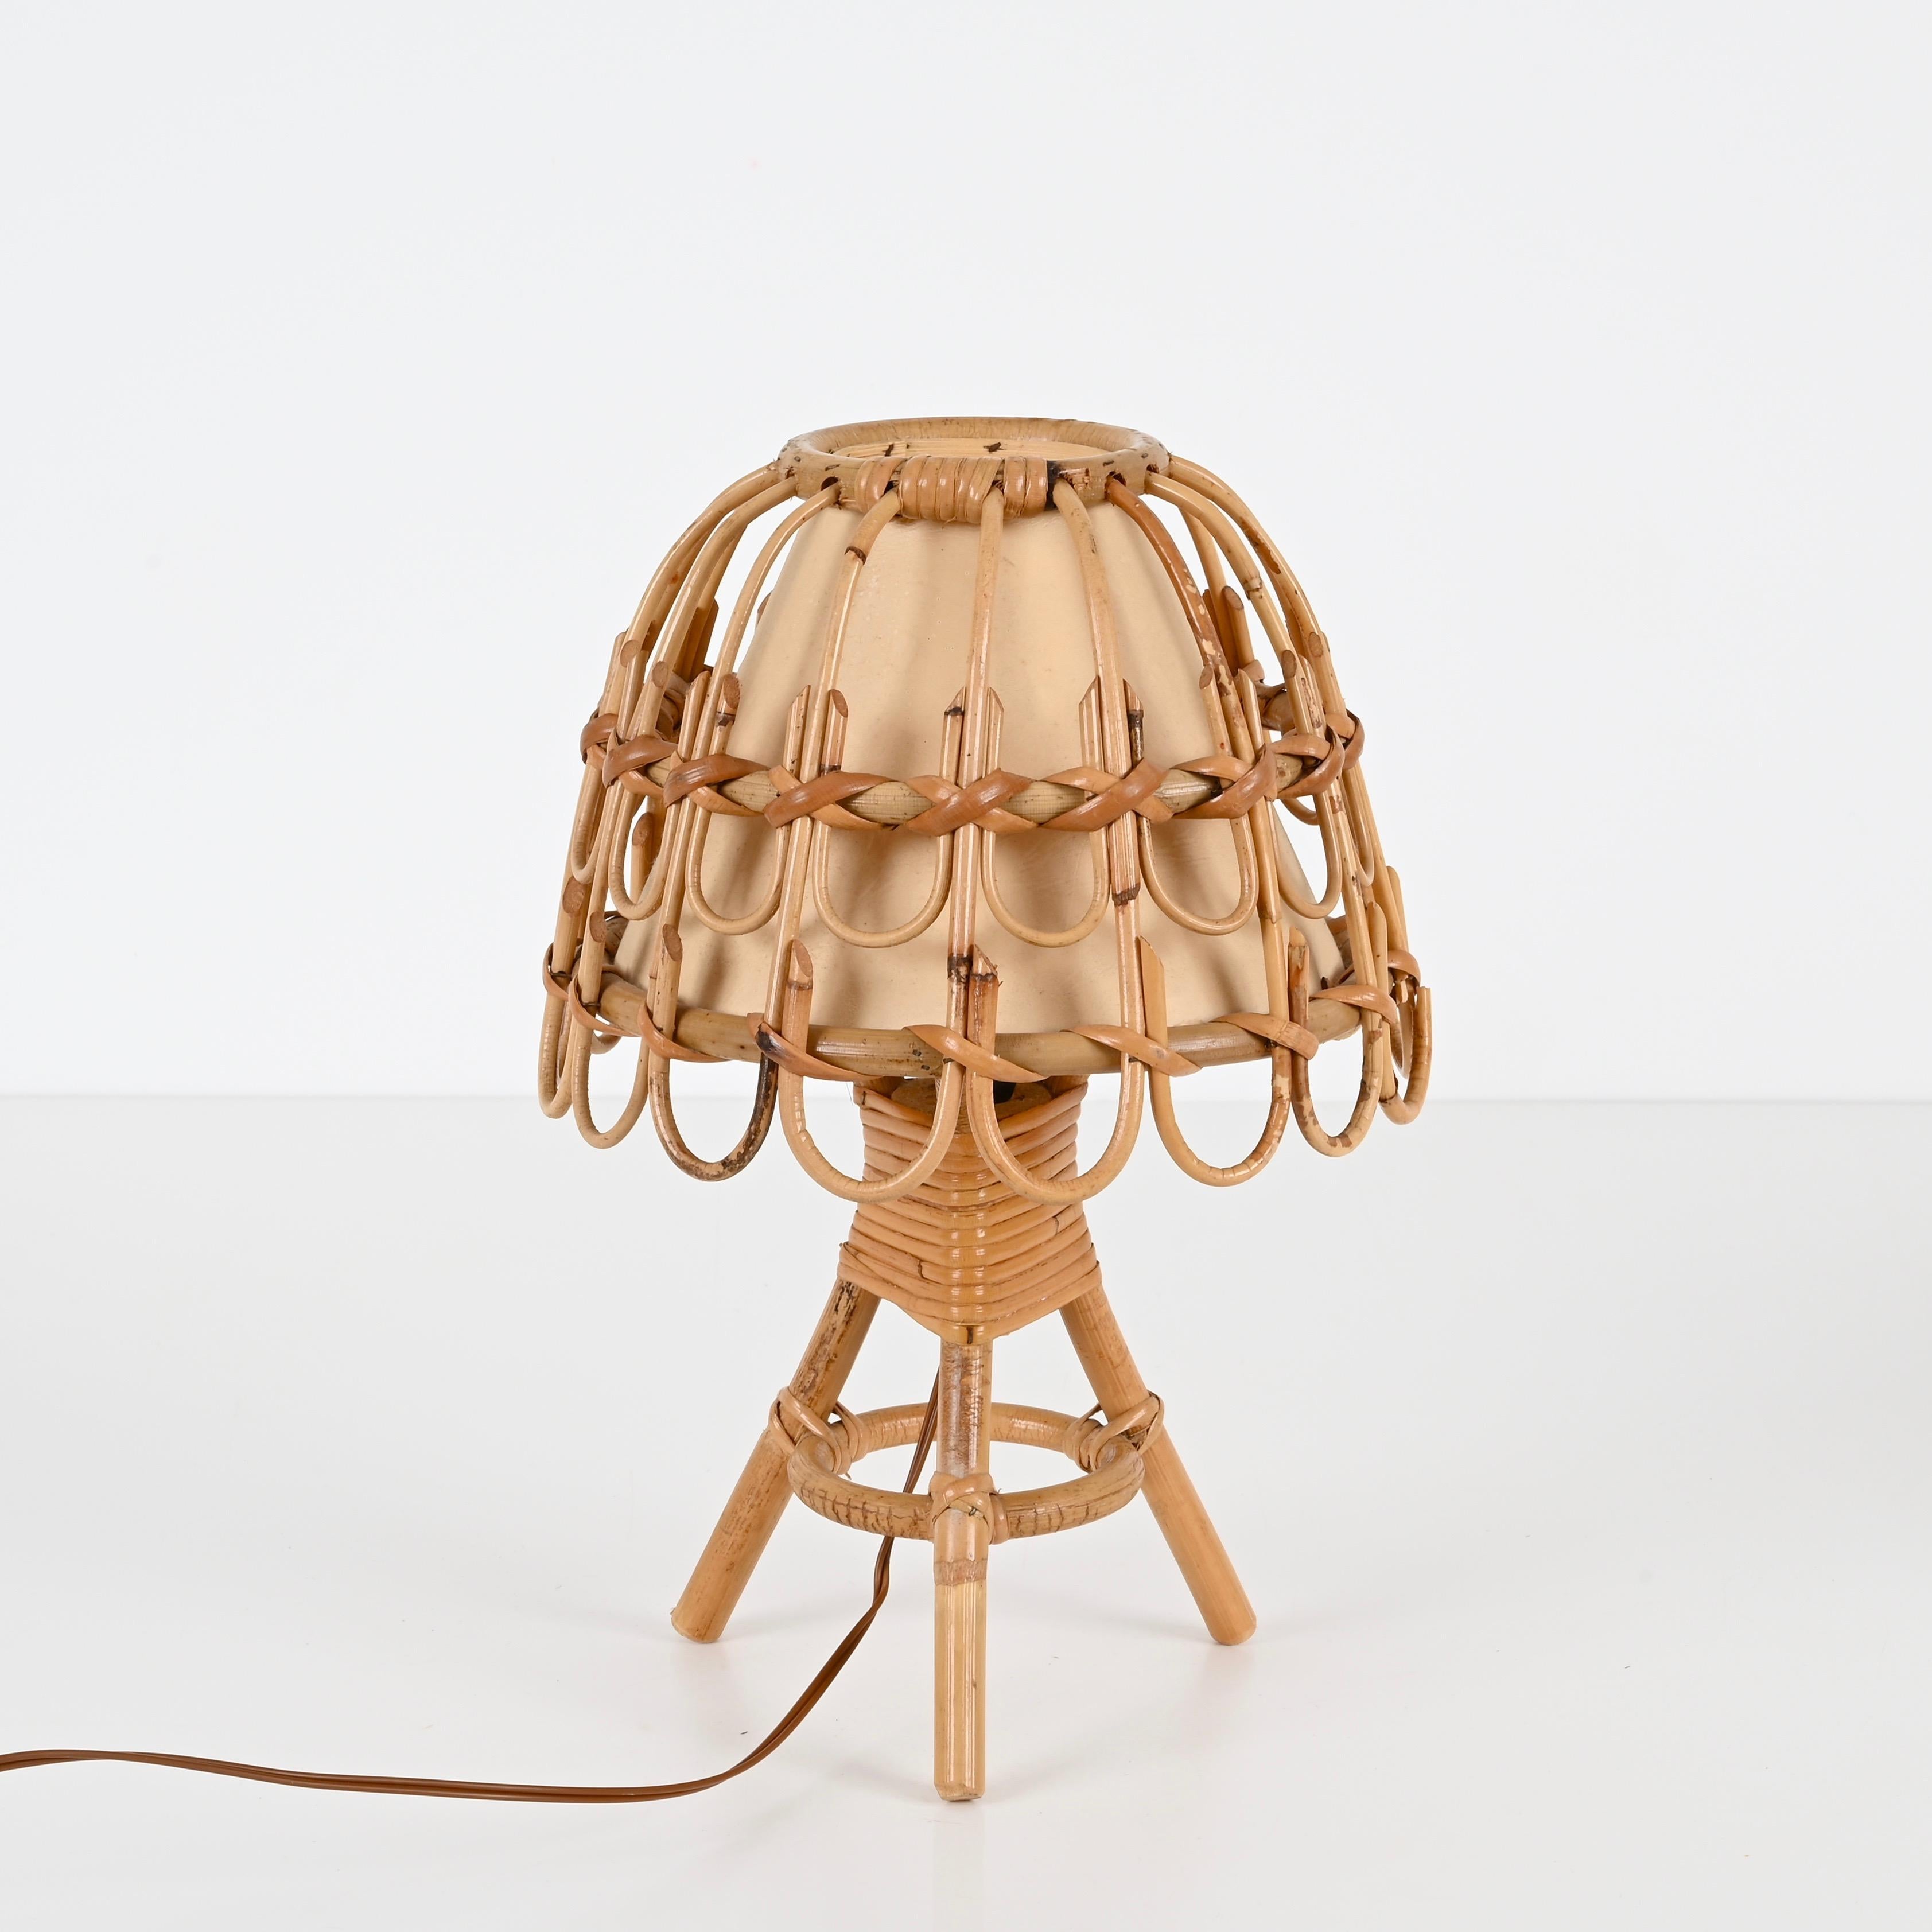 Pair of Midcentury Table Lamps in Rattan and Wicker, Louis Sognot, France, 1960s 6